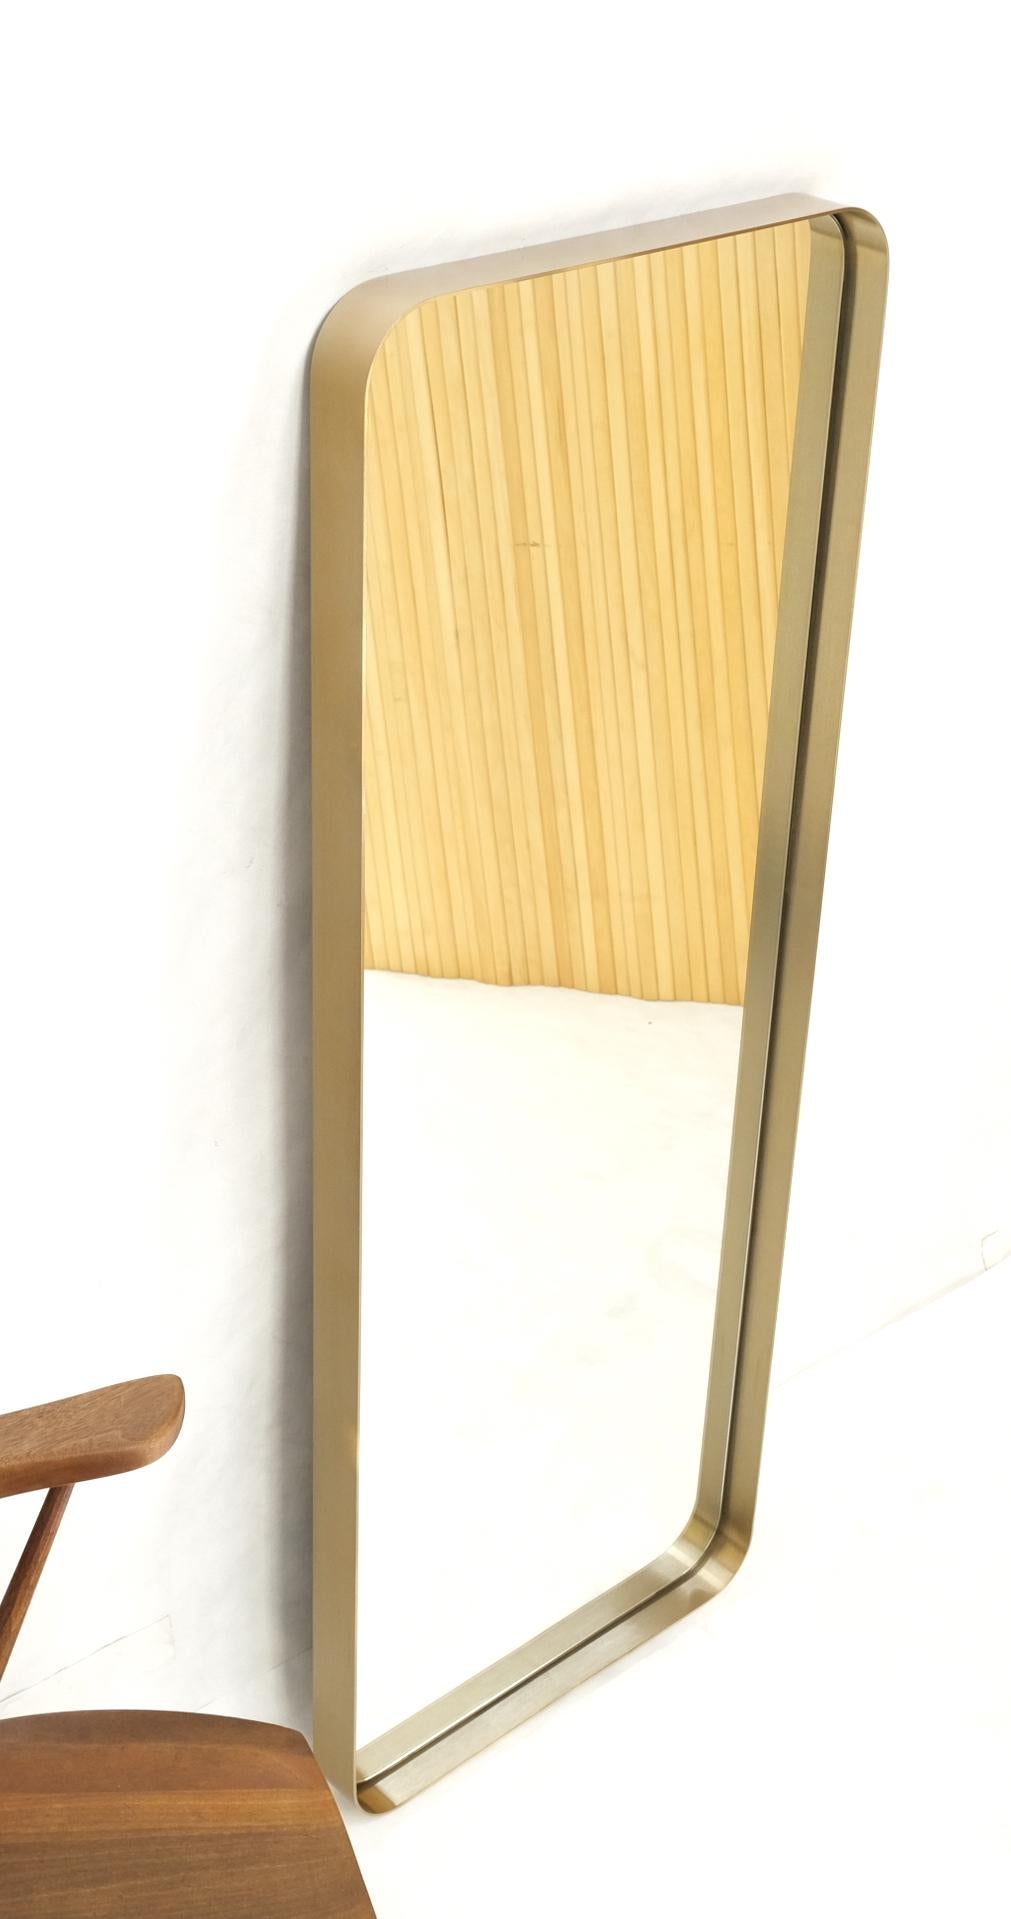 Bent brushed brass frame rounded corners mid century modern wall mirror mint.
Mirror by Hamilton Hills with certificate.